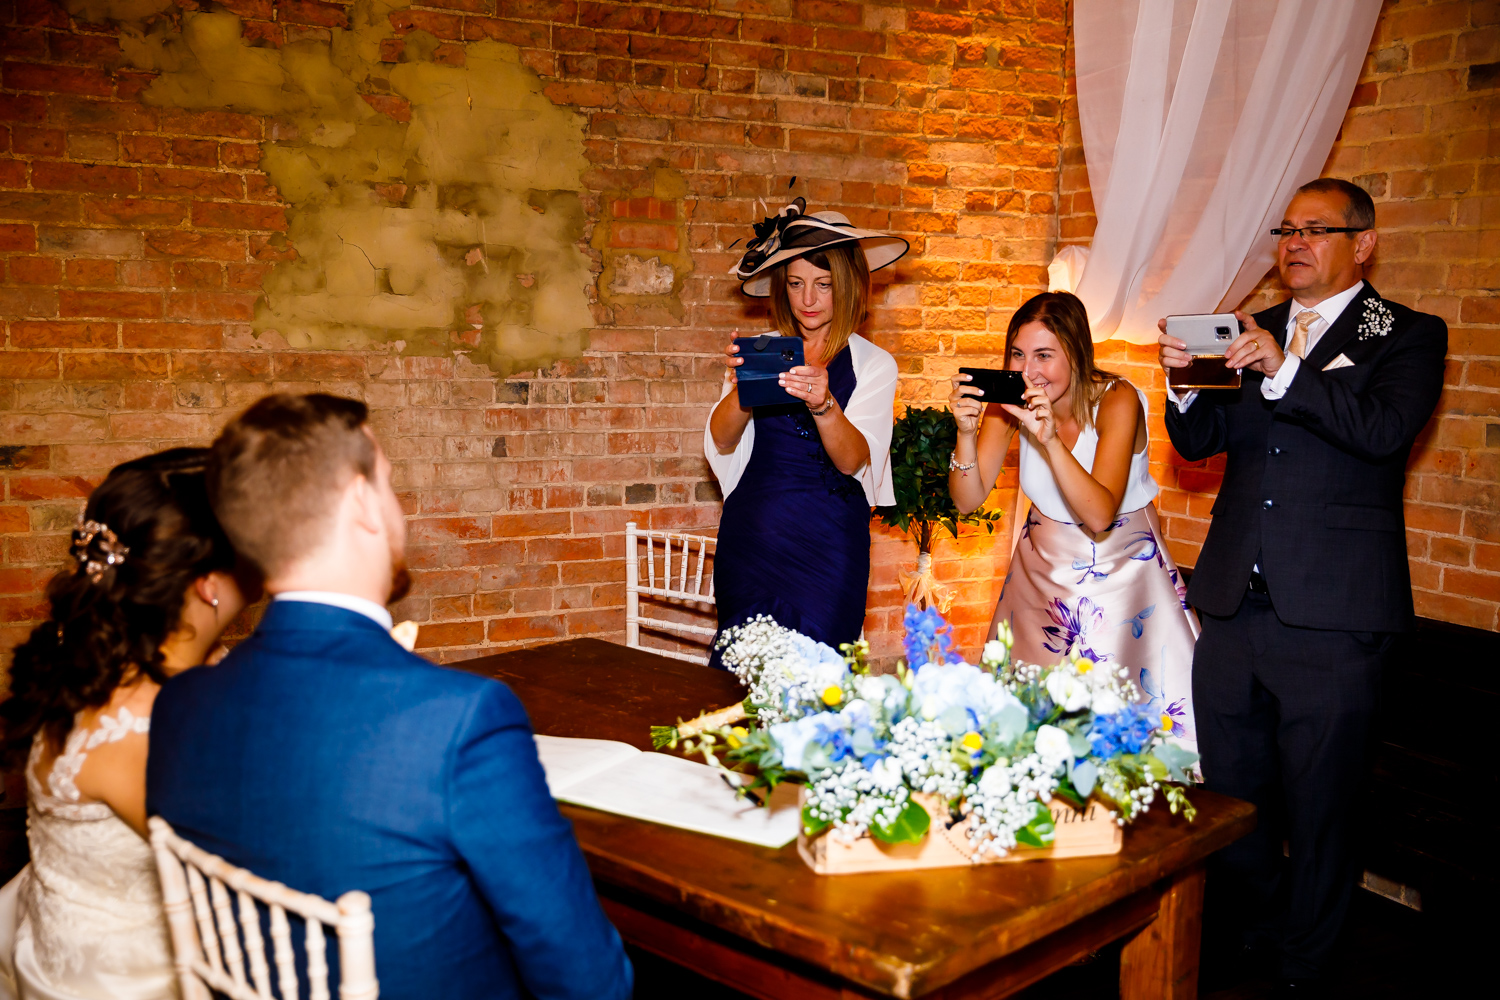 Guests taking the bridge and grooms photos whilst signing the register